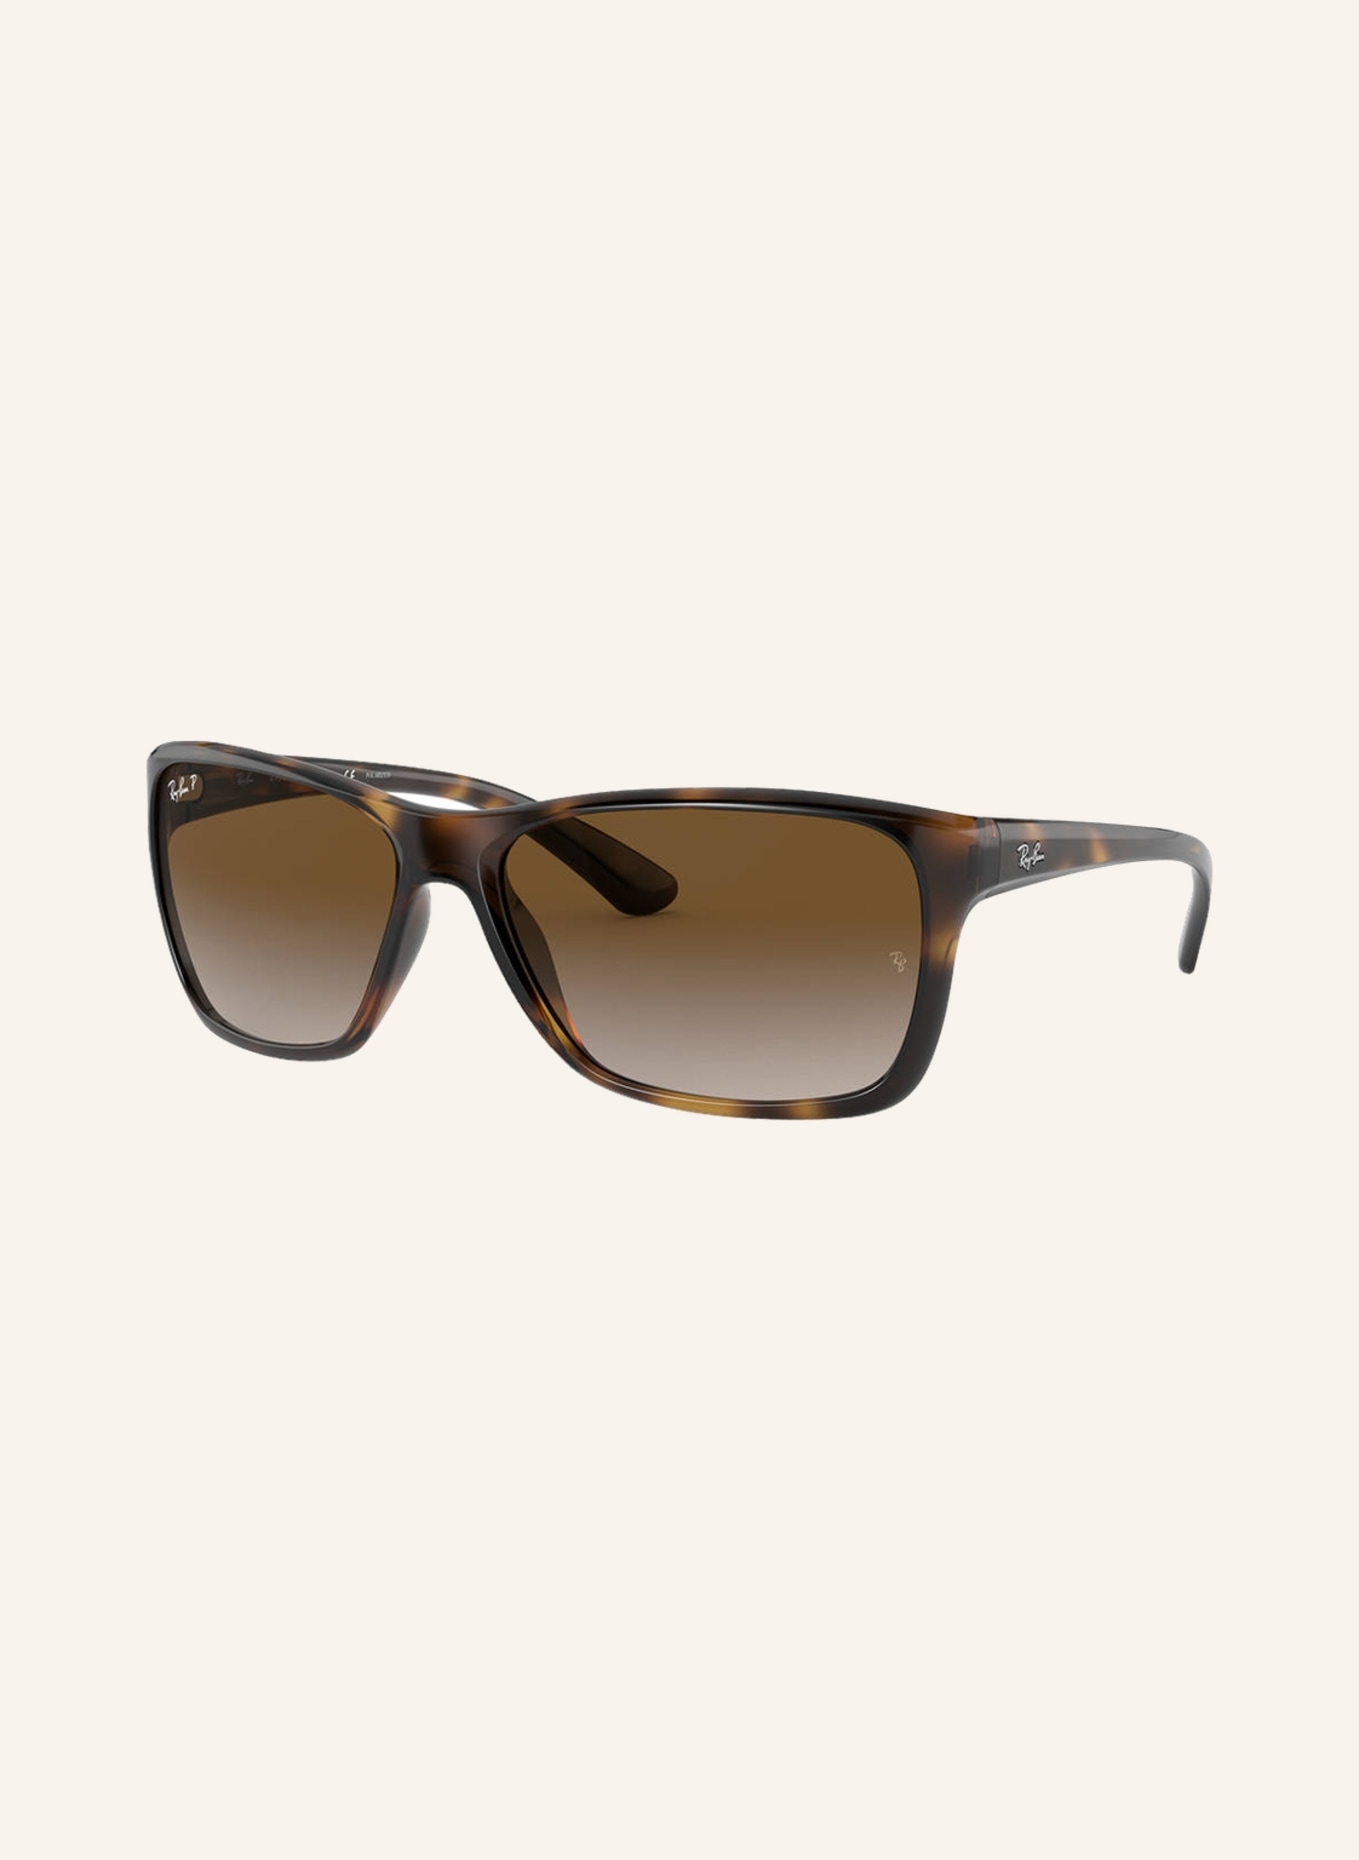 Ray-Ban Sunglasses RB4331, Color: 710/T5 - HAVANA/ BROWN POLARIZED (Image 1)